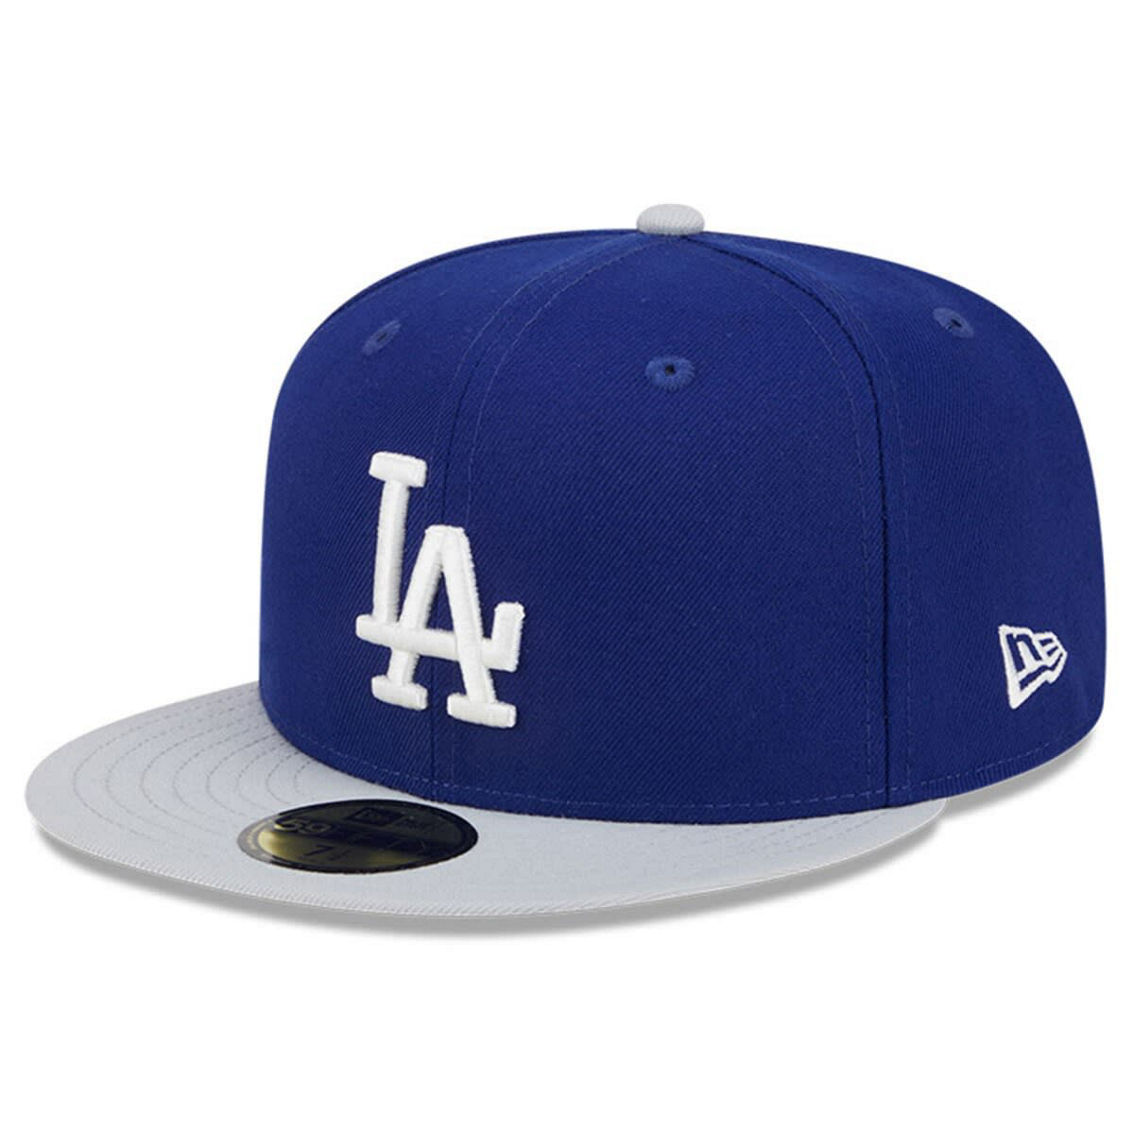 New Era Men's Royal Los Angeles Dodgers Big League Chew Team 59FIFTY Fitted Hat - Image 4 of 4